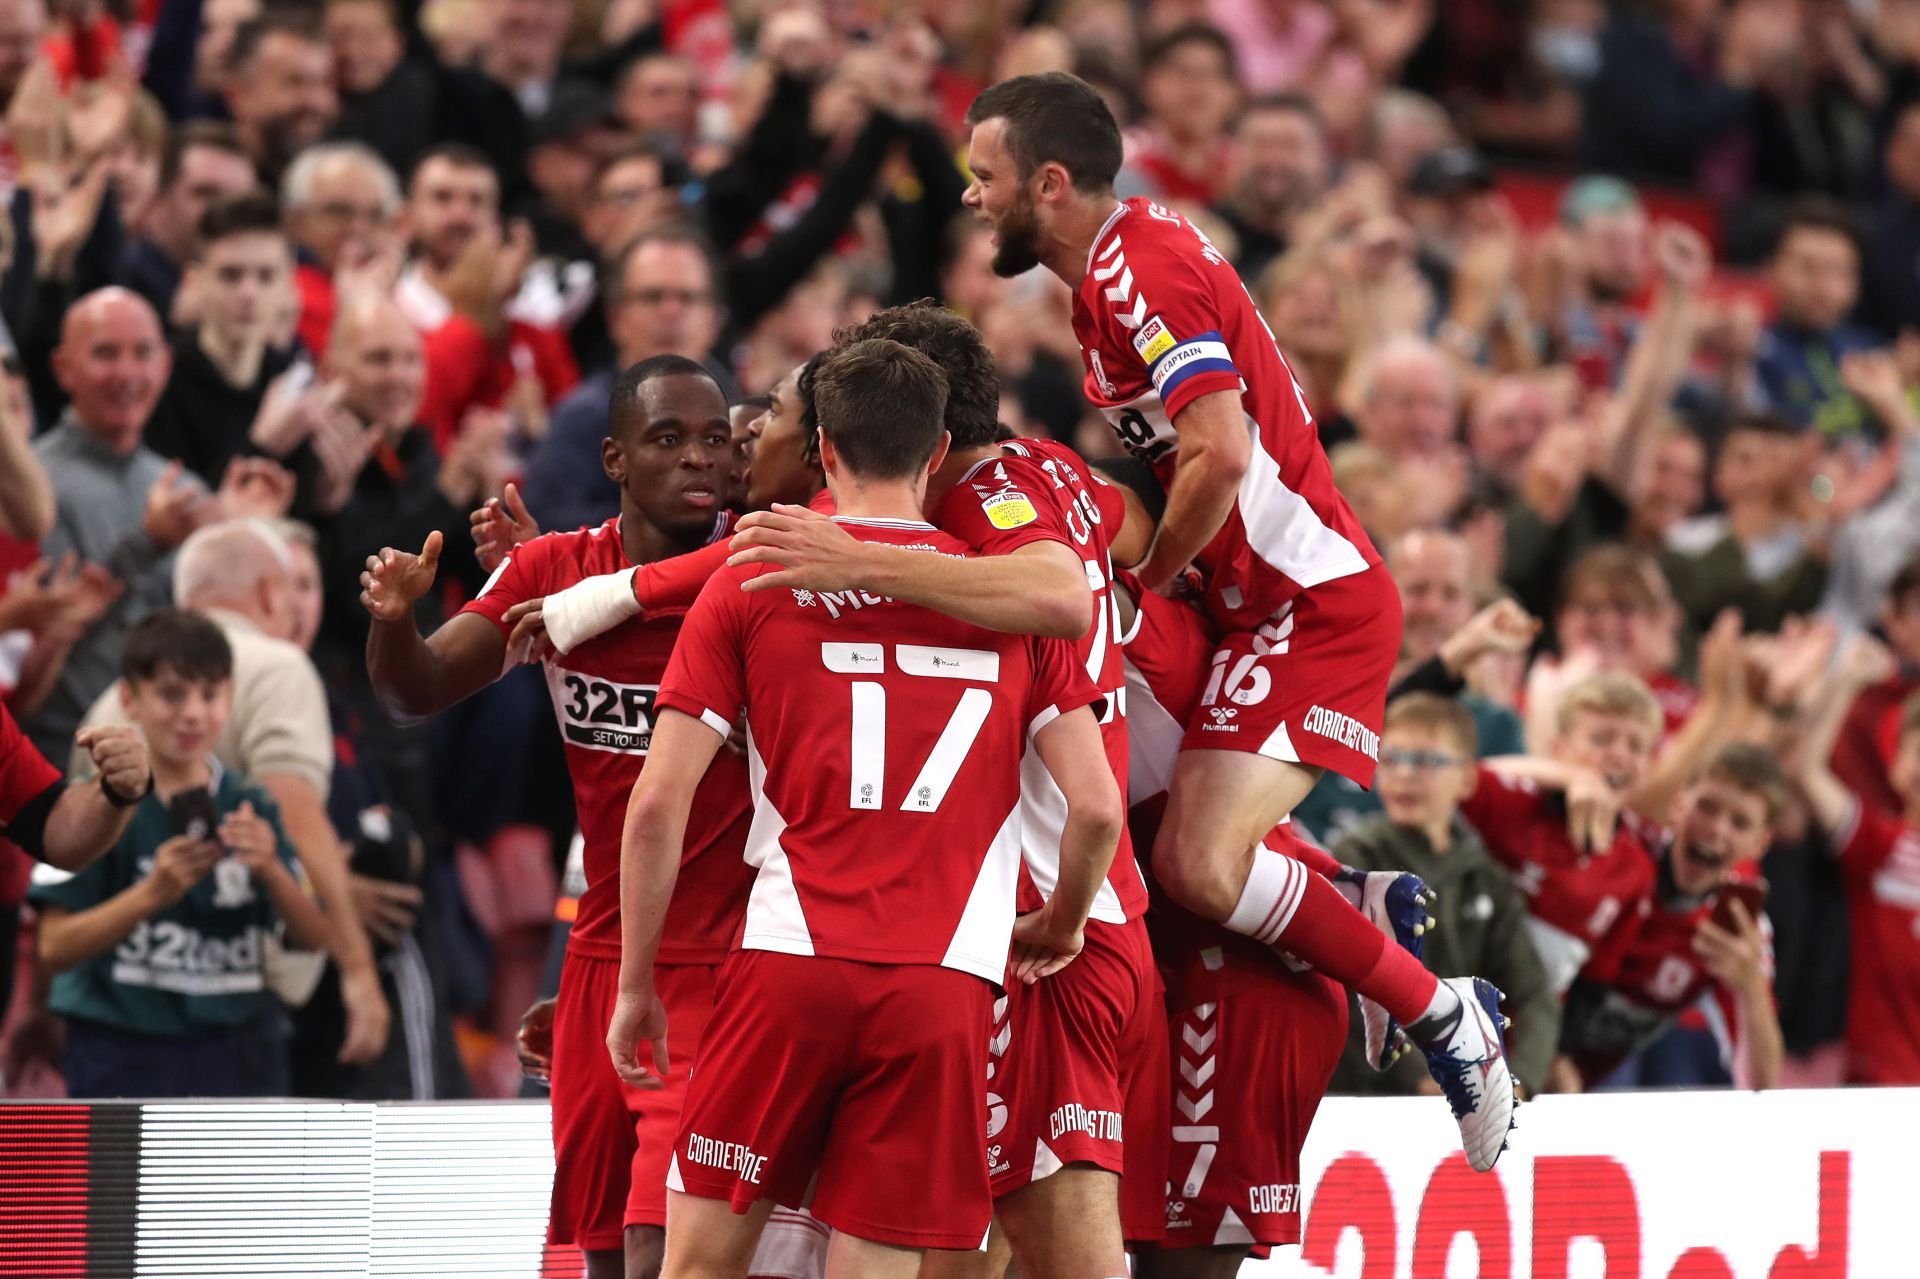 Middlesbrough will be looking to climb up the table